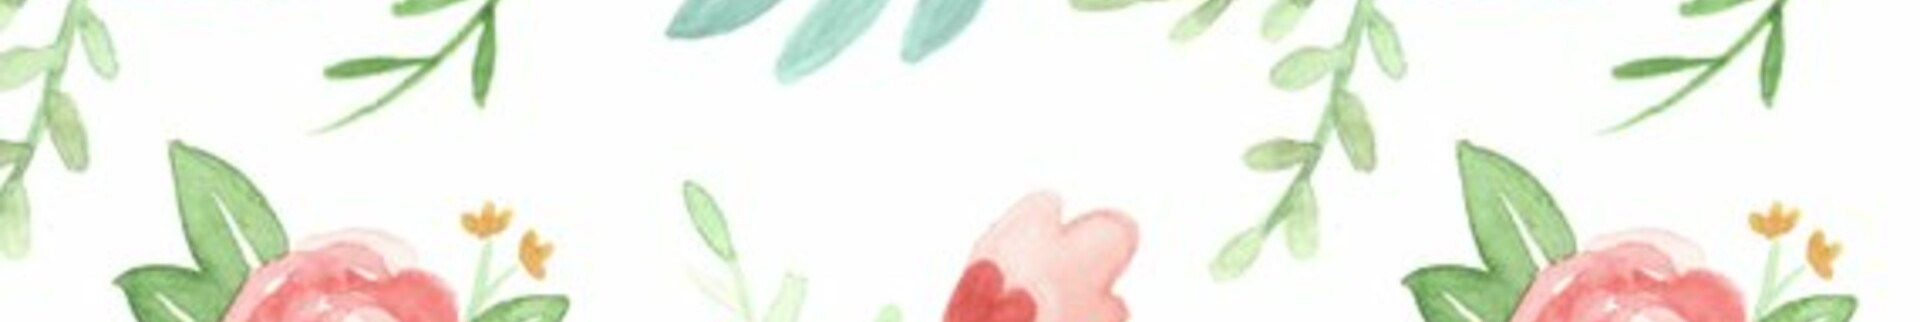 Sweet Pea Consignment's banner image.